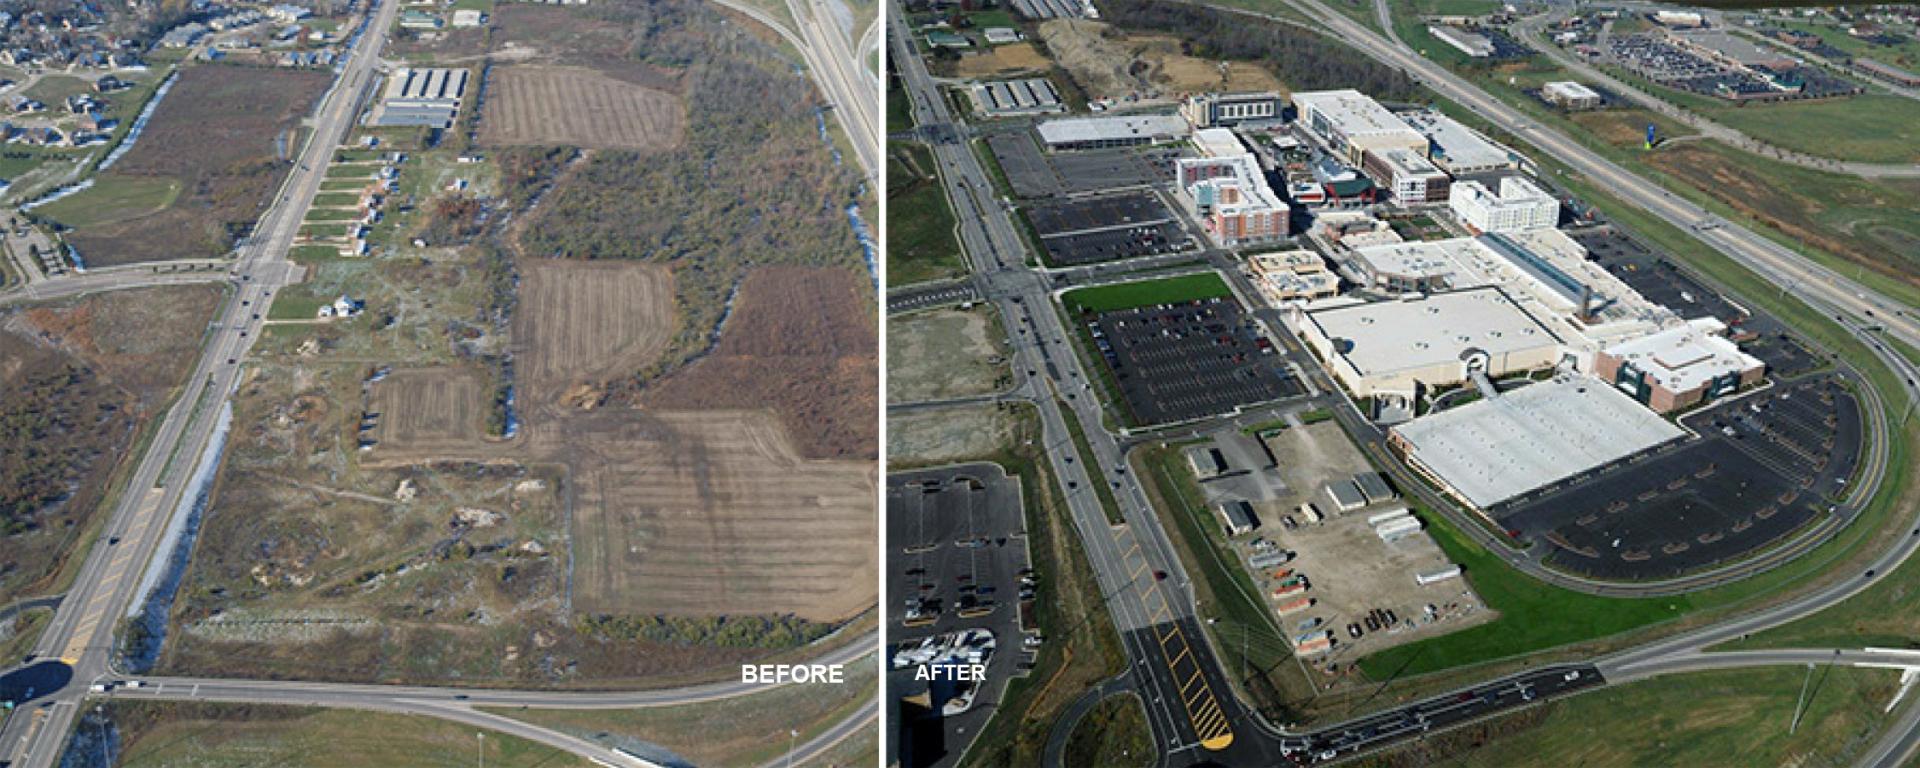 before construction land photo and after construction development